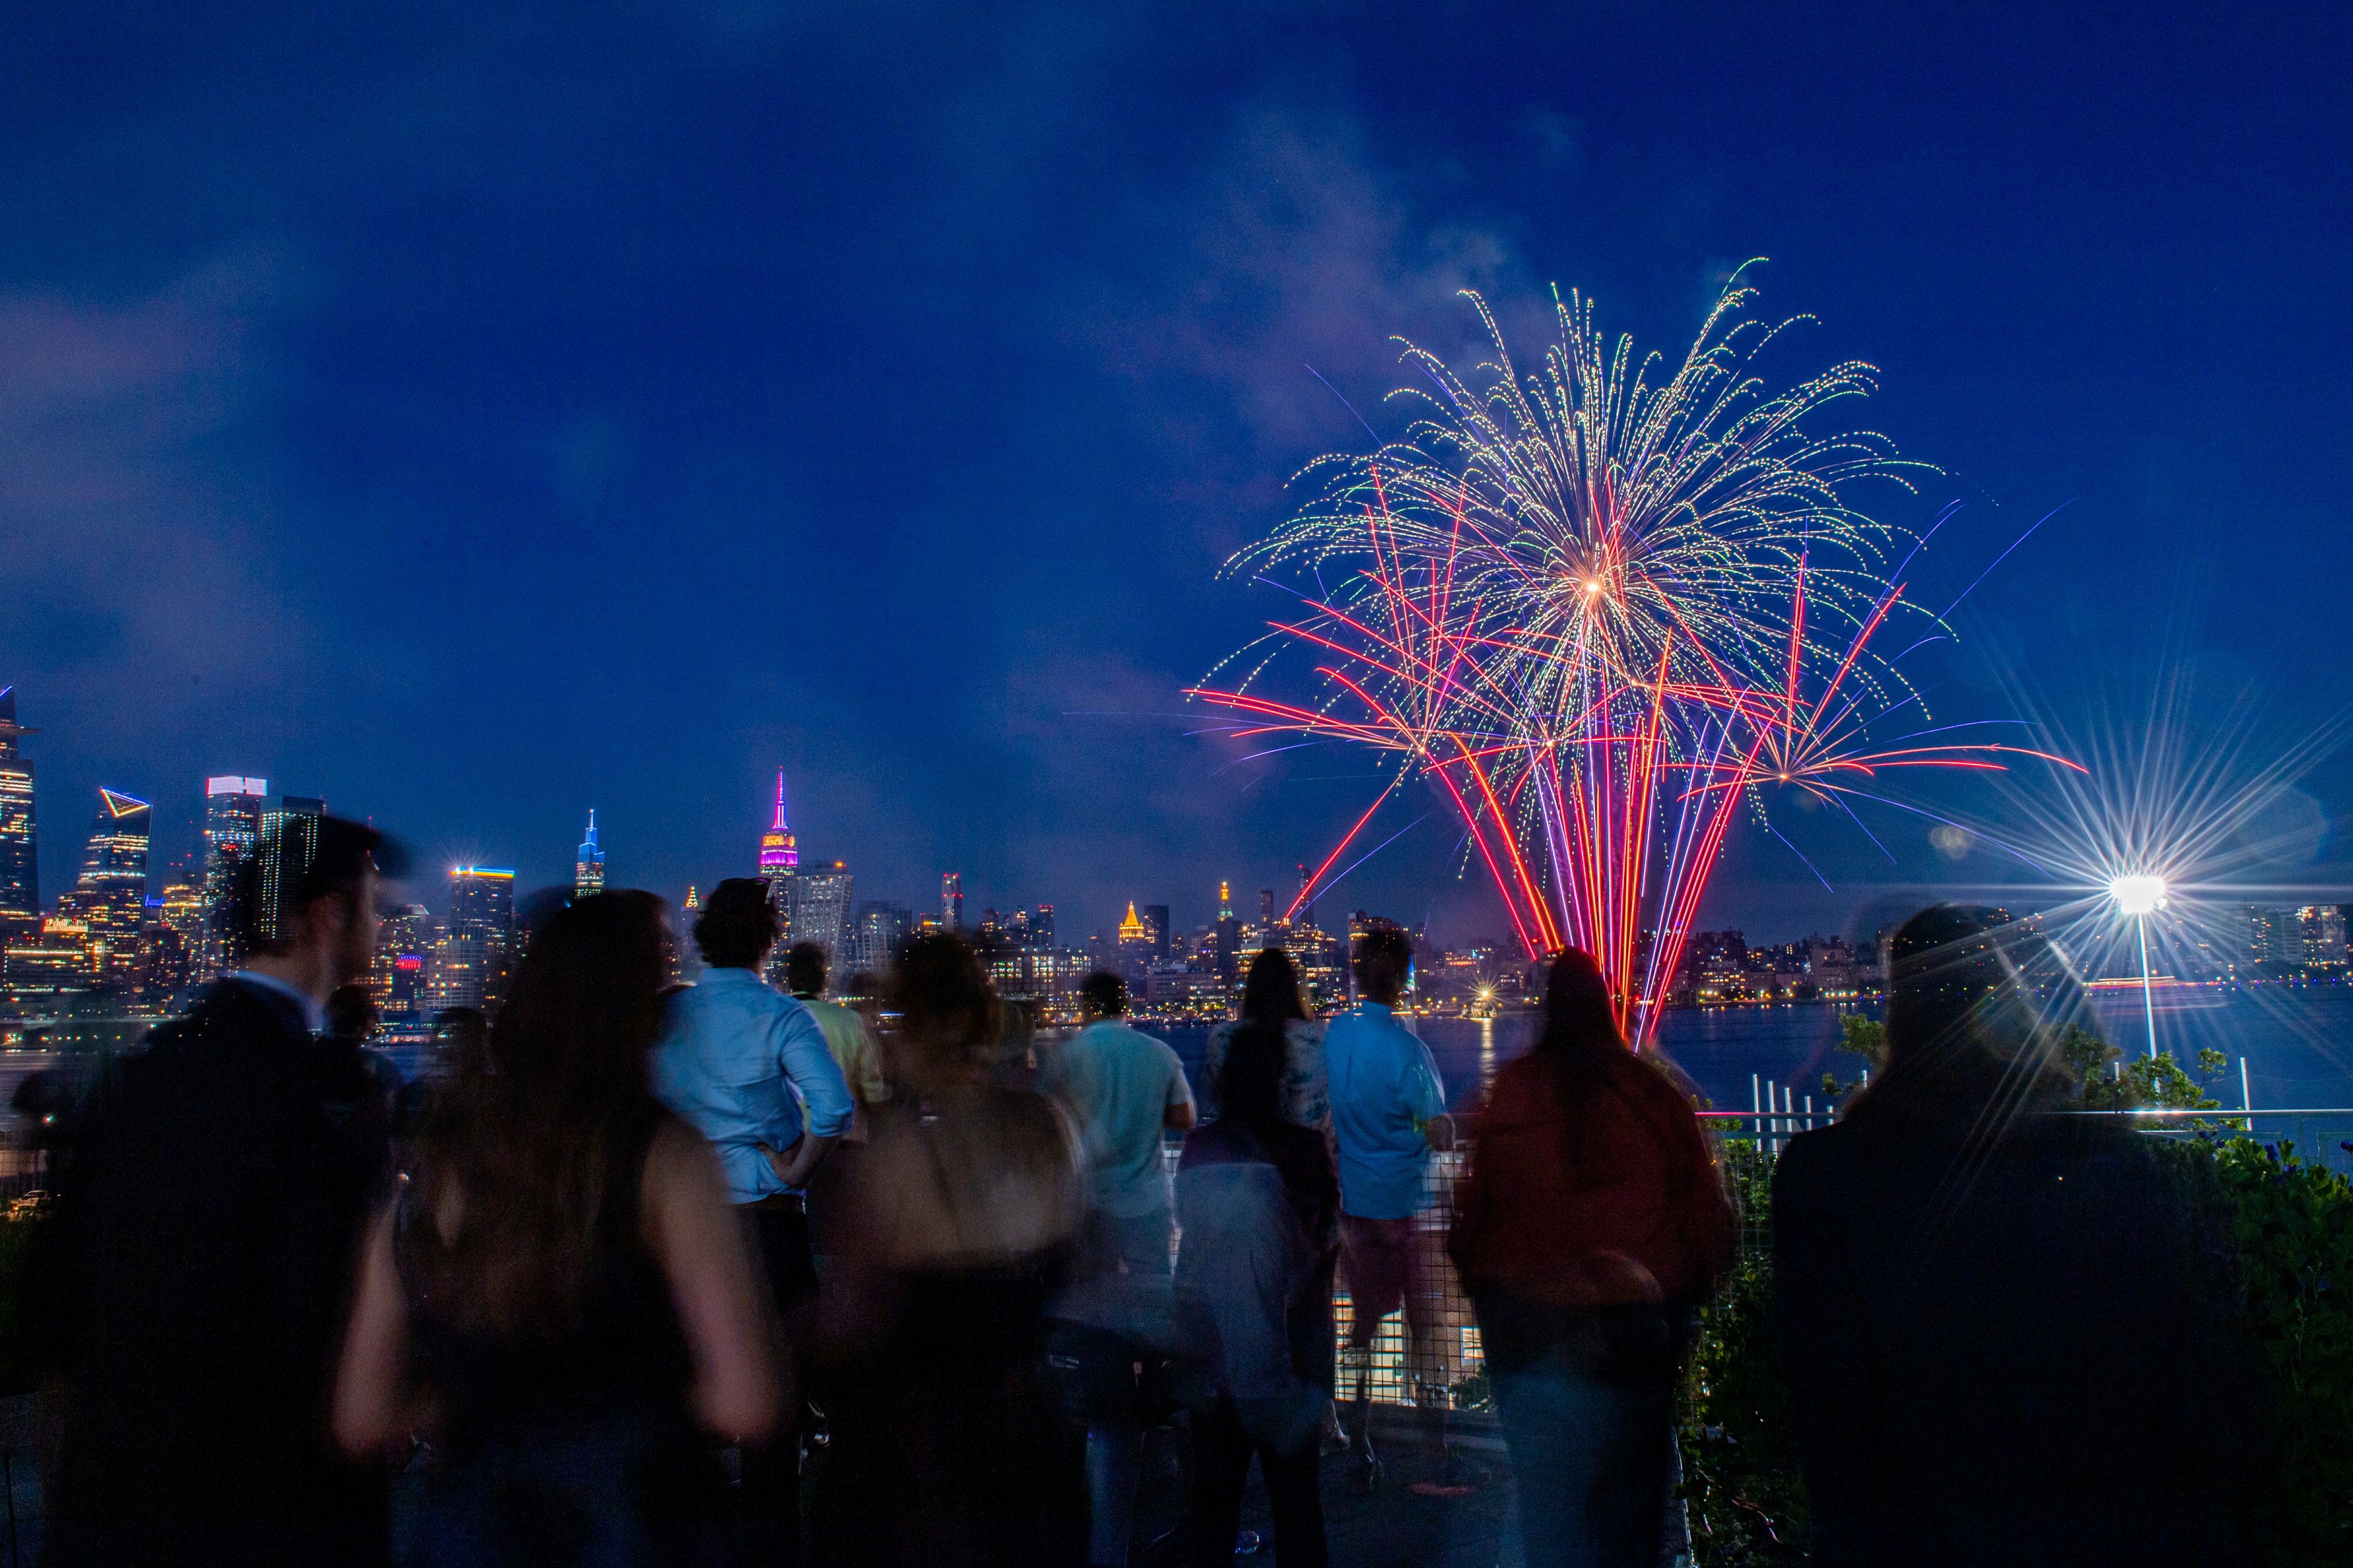 A crowd on Stevens campus watch fireworks with the New York skyline in background